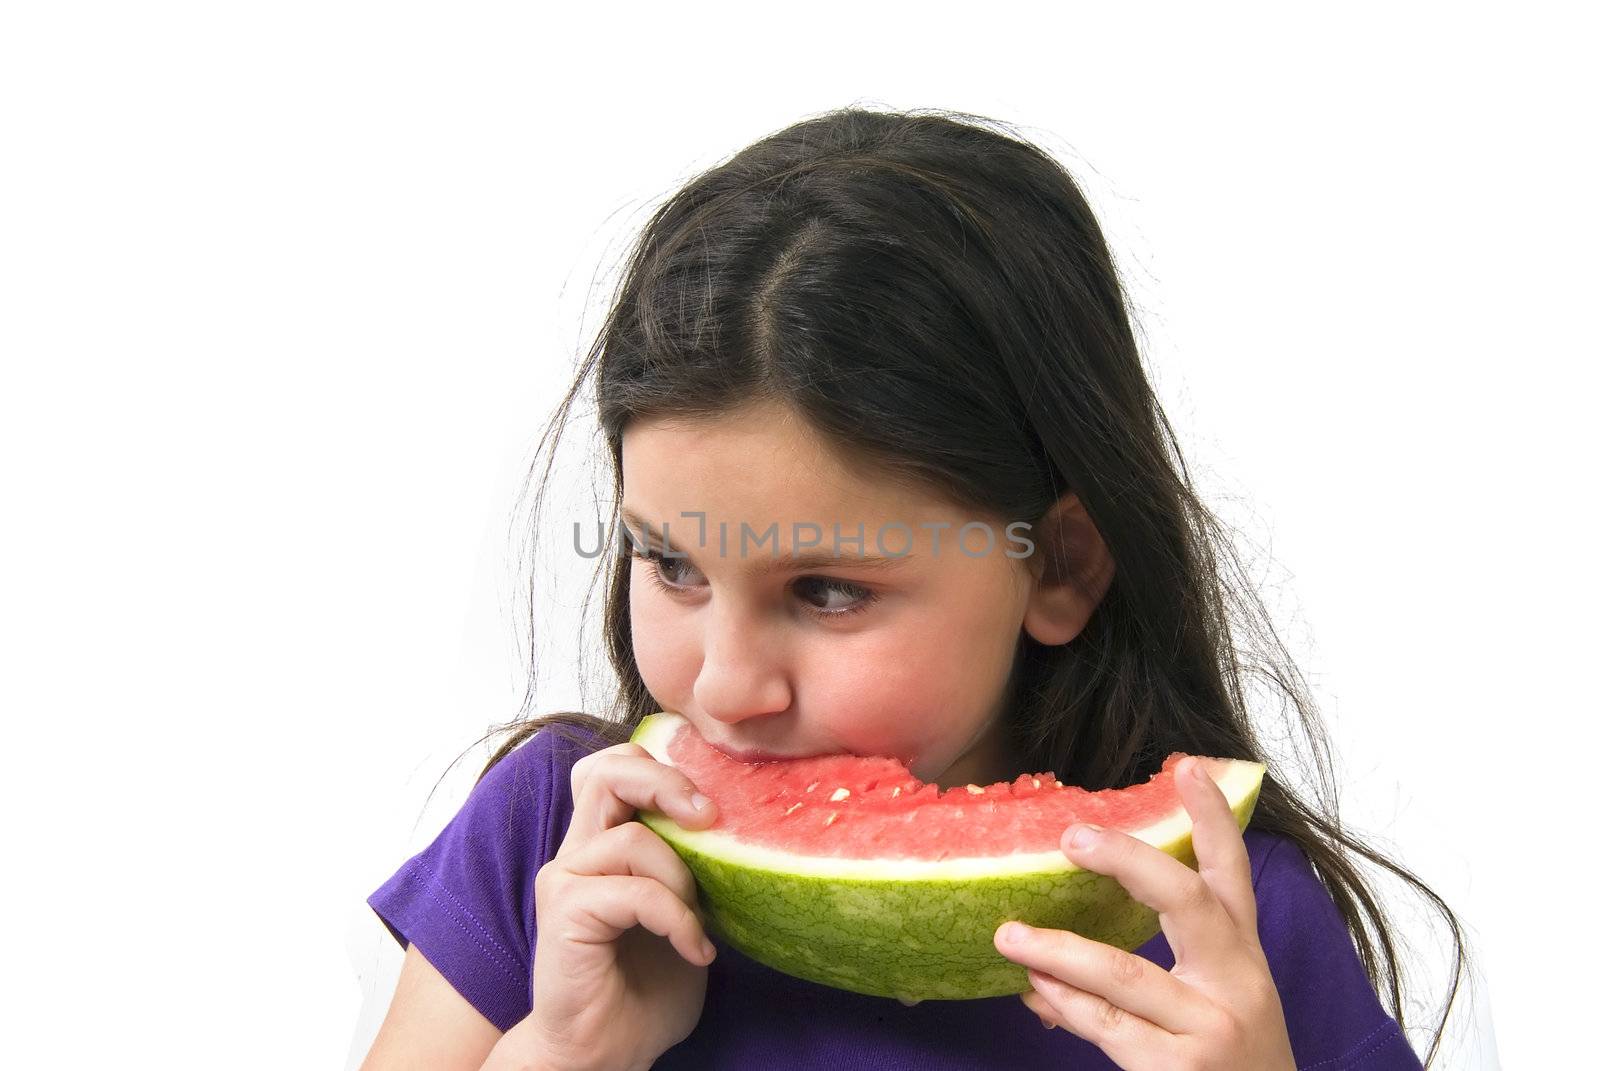 girl eating Watermelon isolated on white background